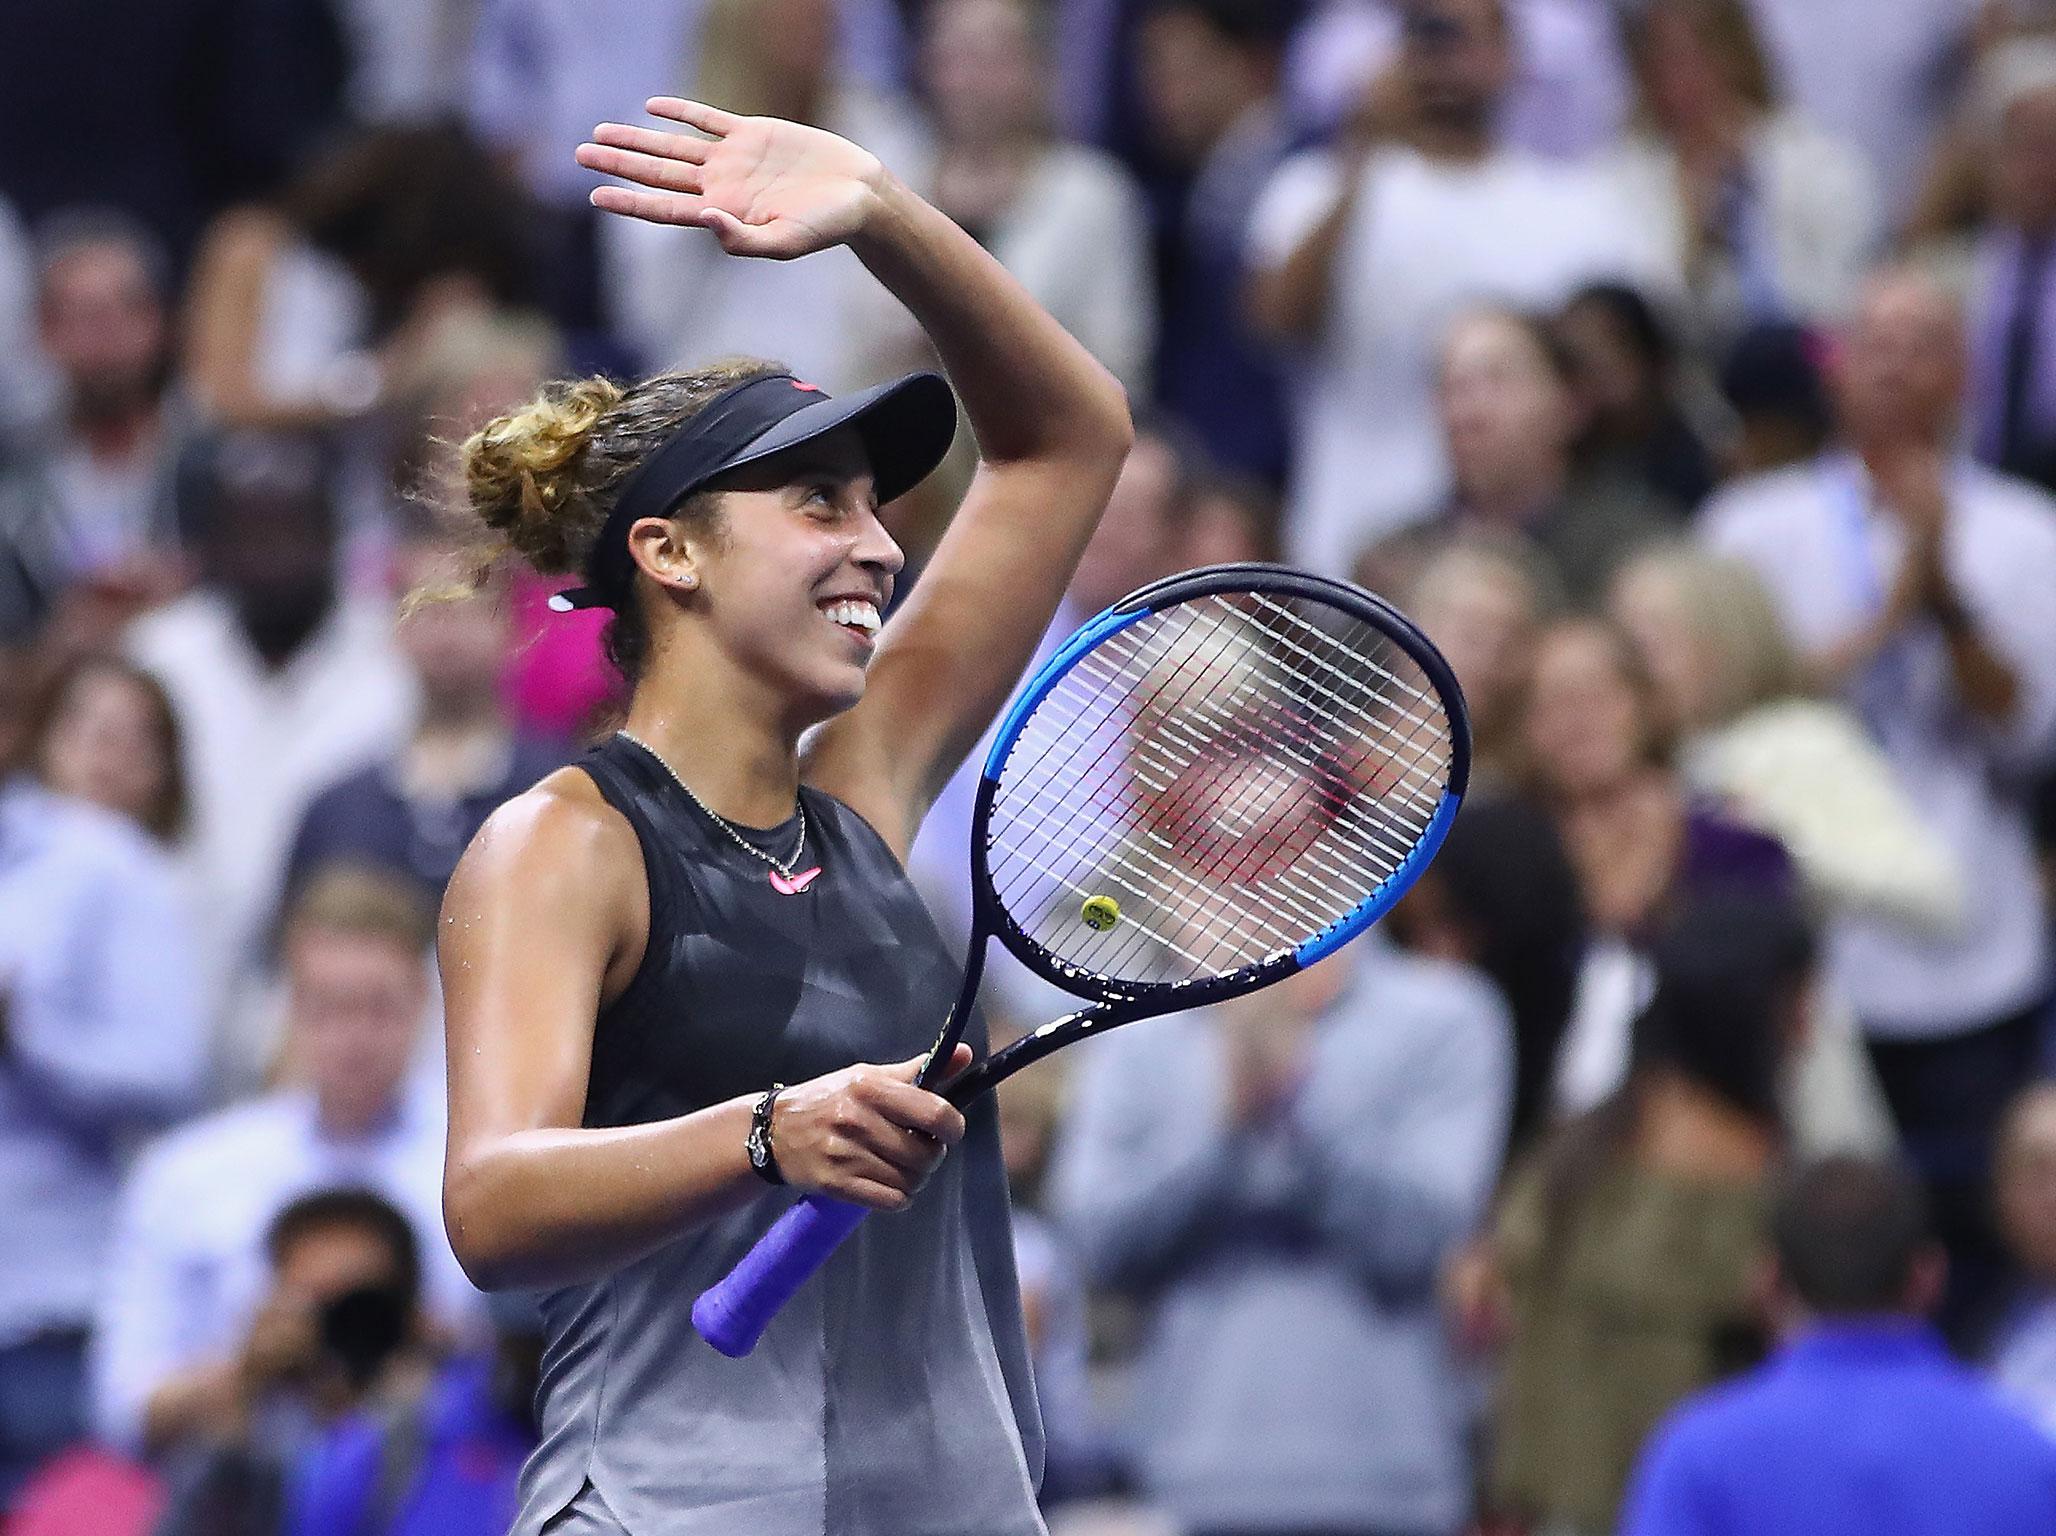 Madison Keys made it an all American semi-final line-up in New York